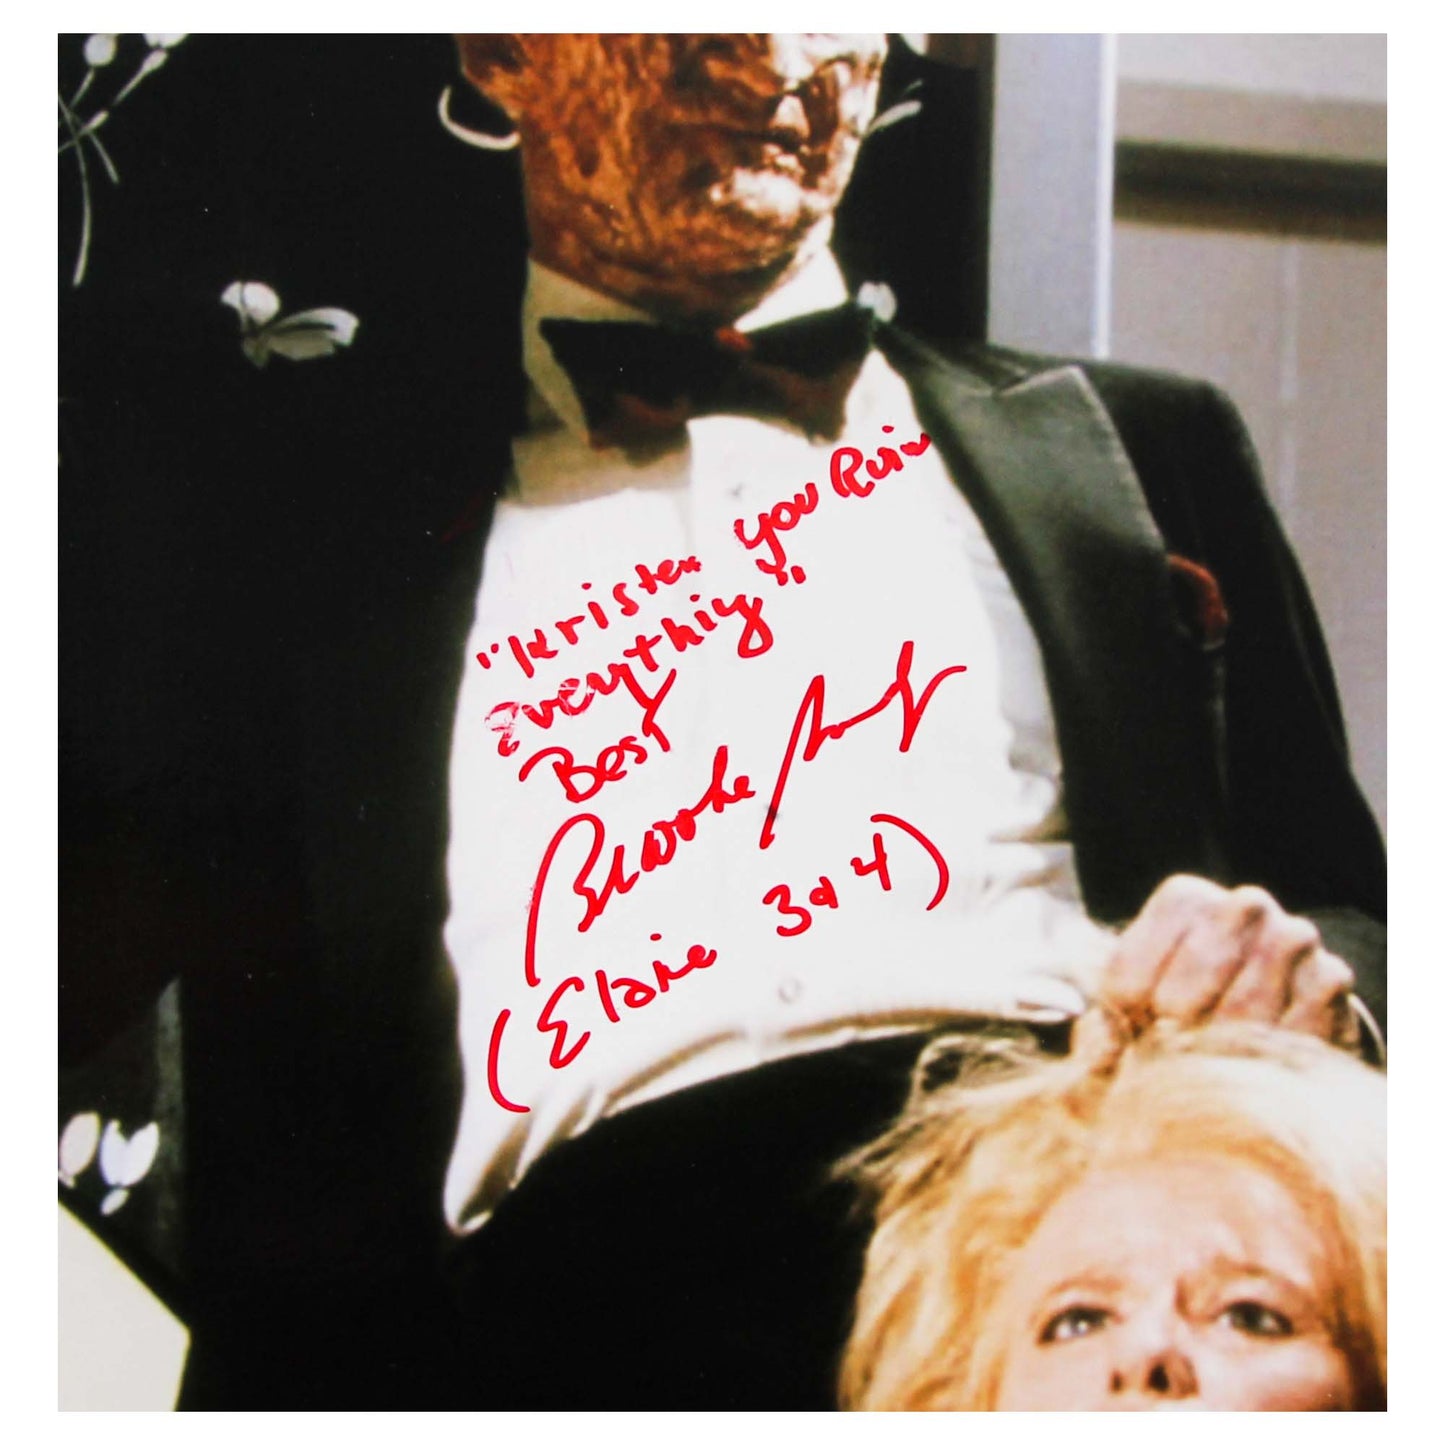 A Nightmare On Elm Street Photo Signed By Brooke Bundy Close View